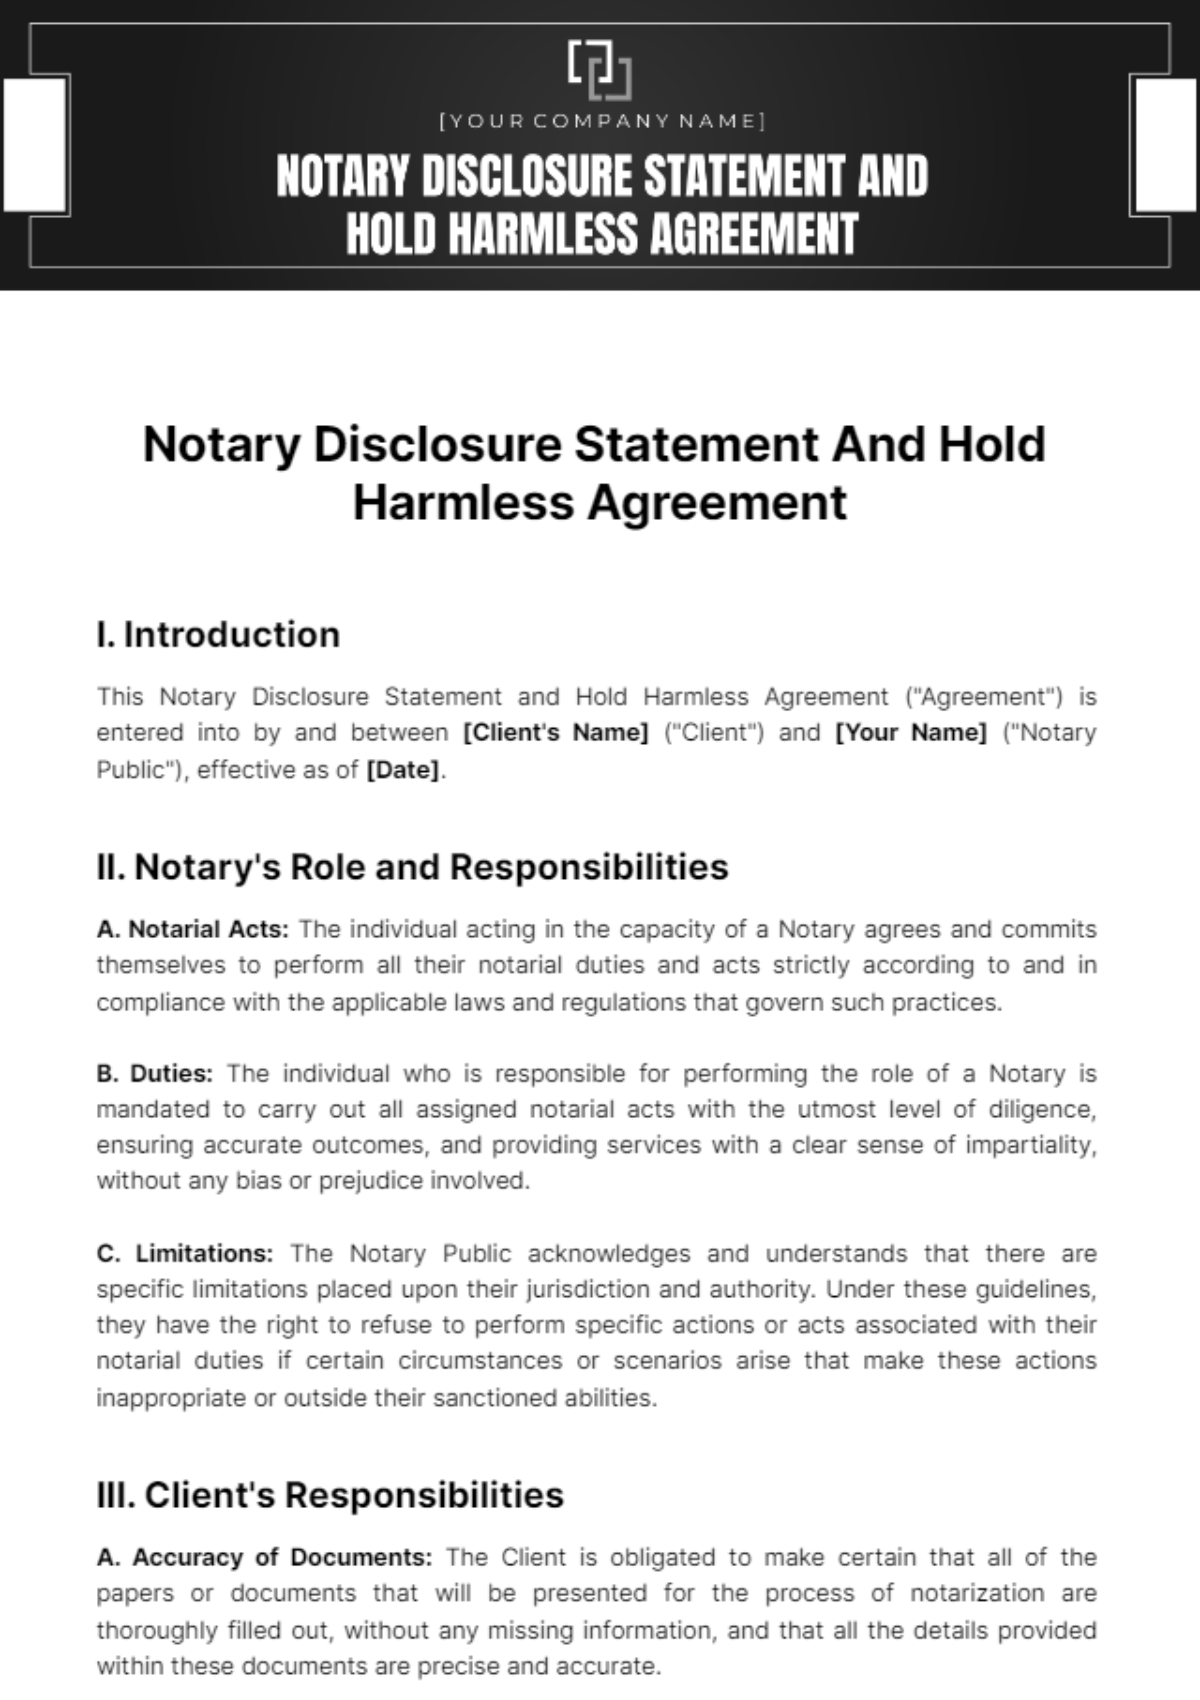 Free Notary Disclosure Statement And Hold Harmless Agreement Template